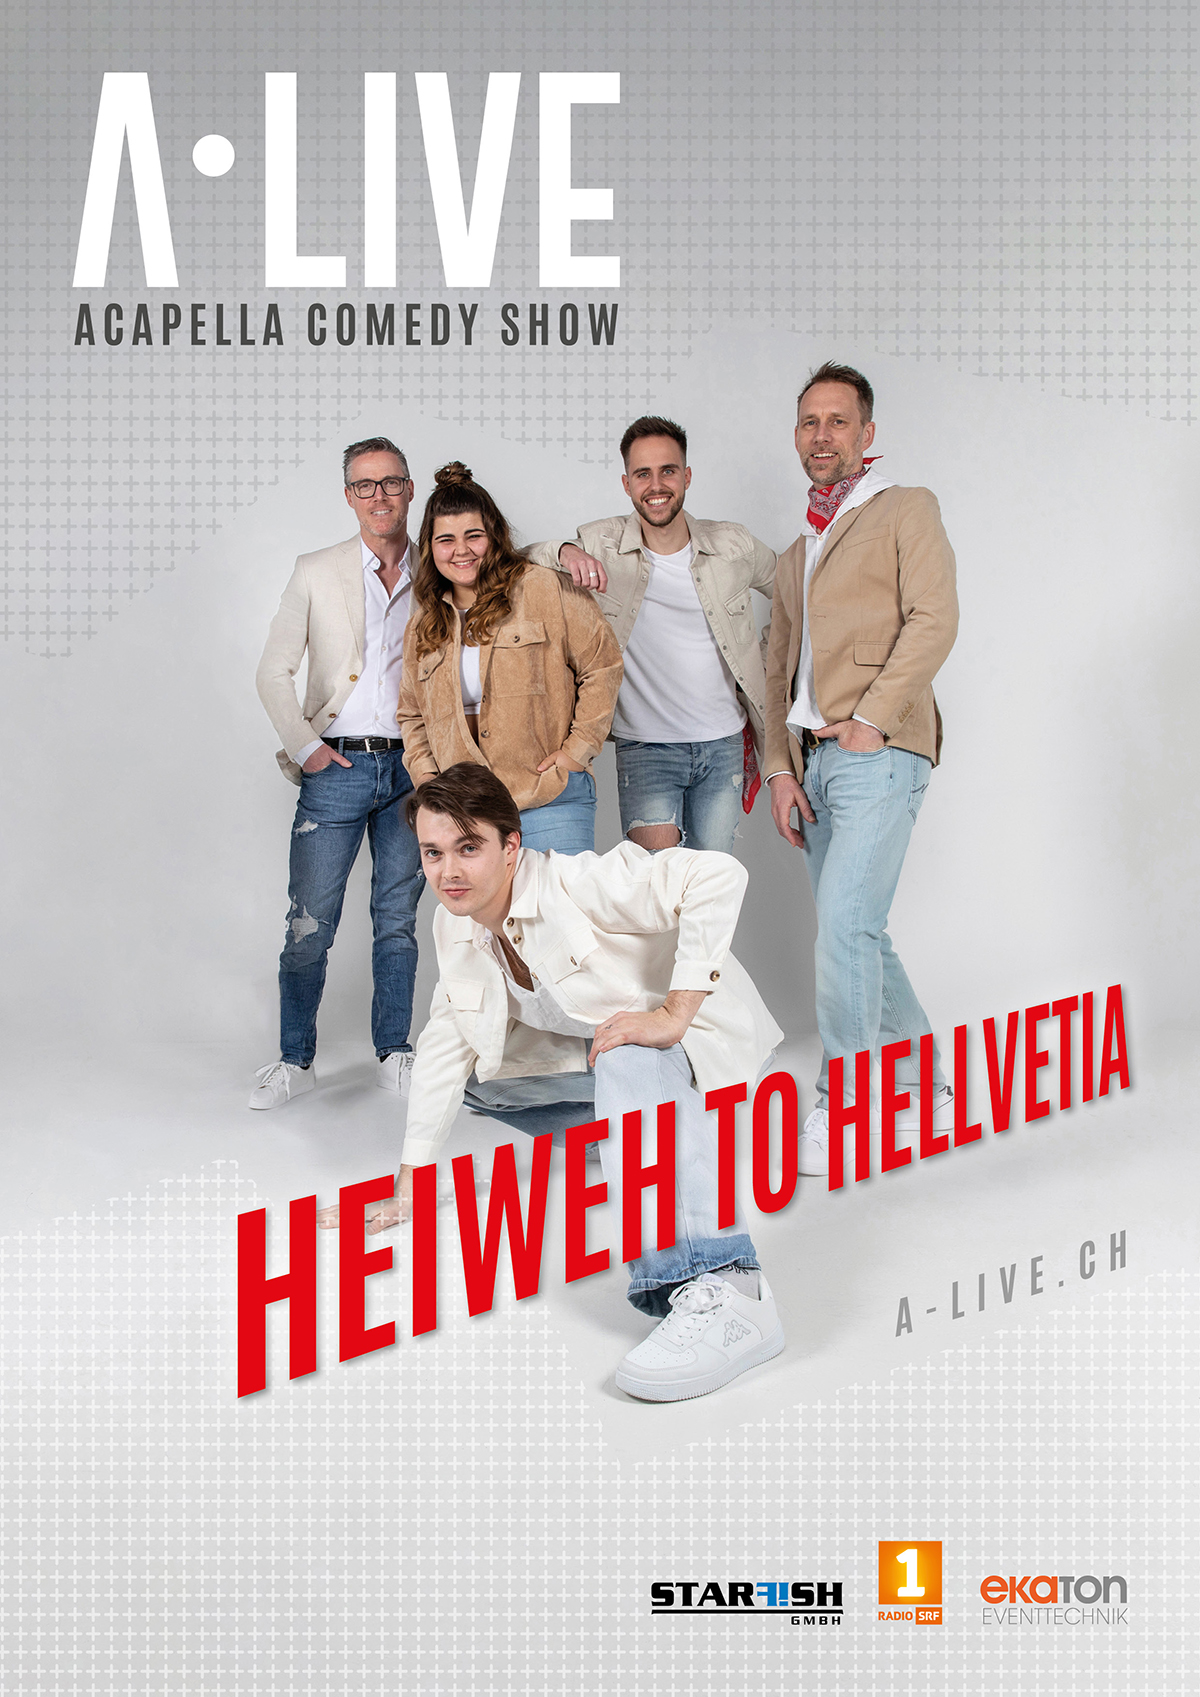 A-live Flyer Fuer Die Neue Acapella Comedy Show Heiweh To Hellvetia